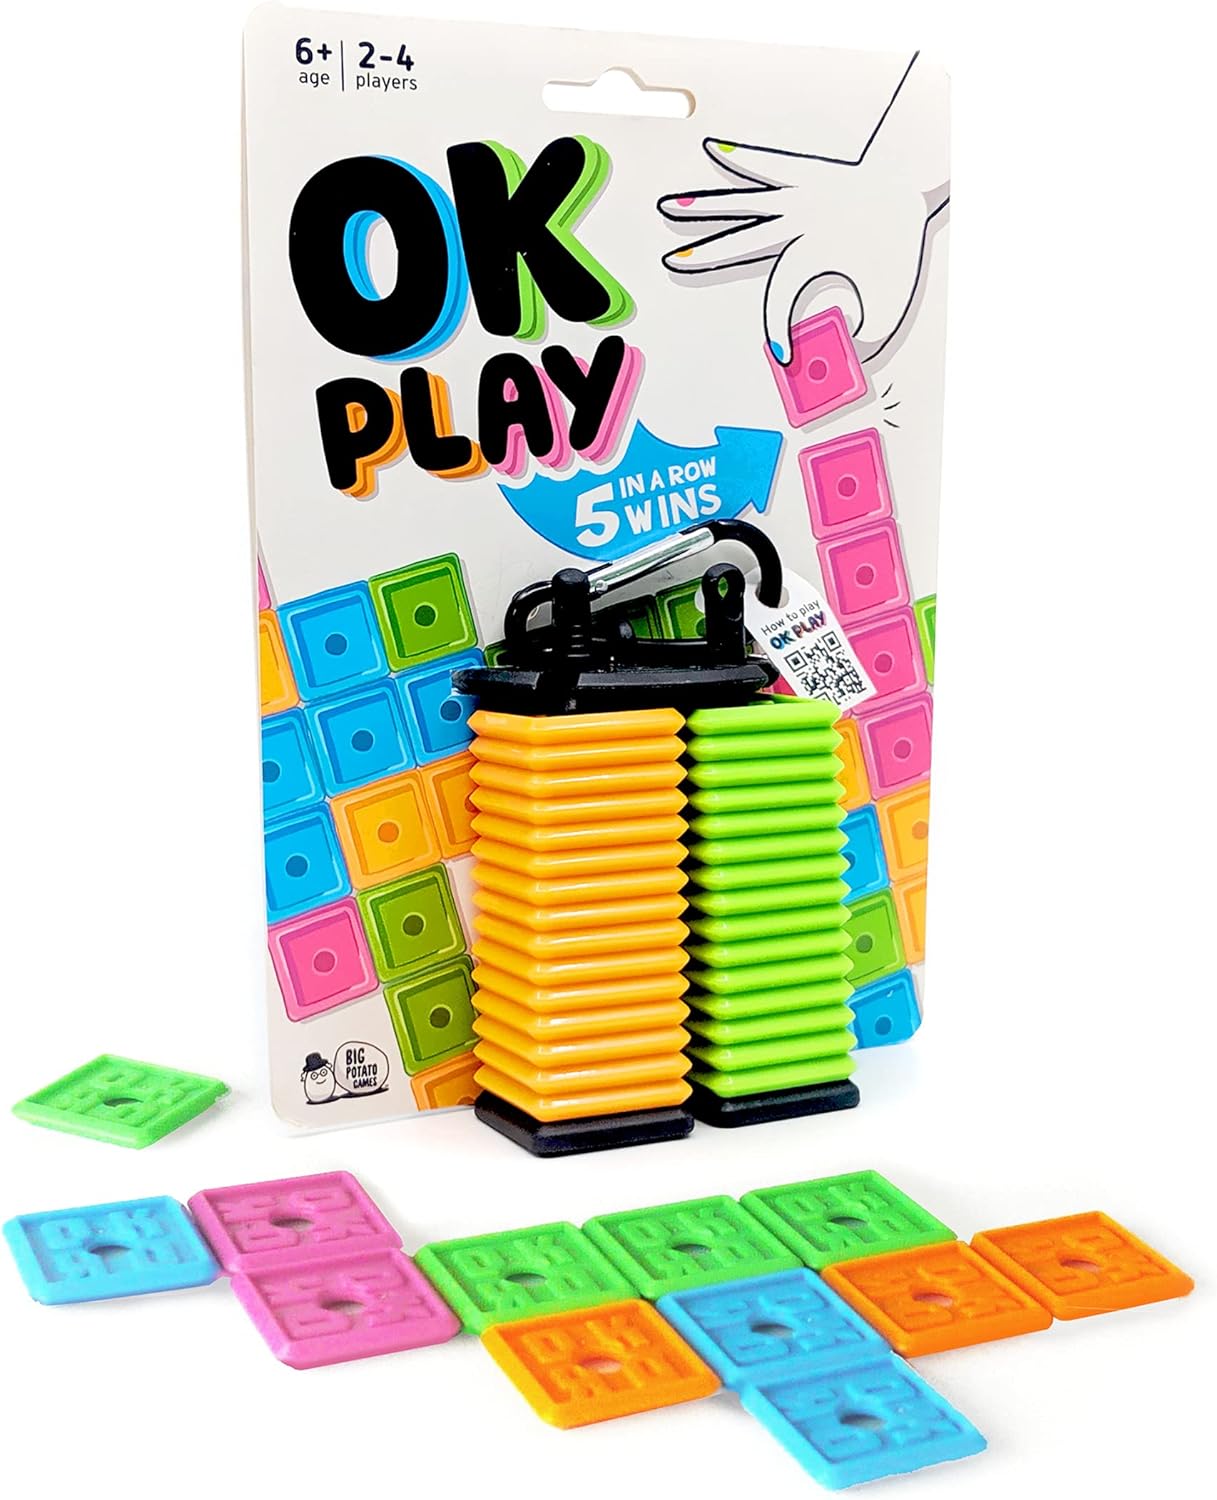 Big Potato OK Play: Fun and Easy Board Game For Kids And Adults | Great Travel Game For 2-4 Players